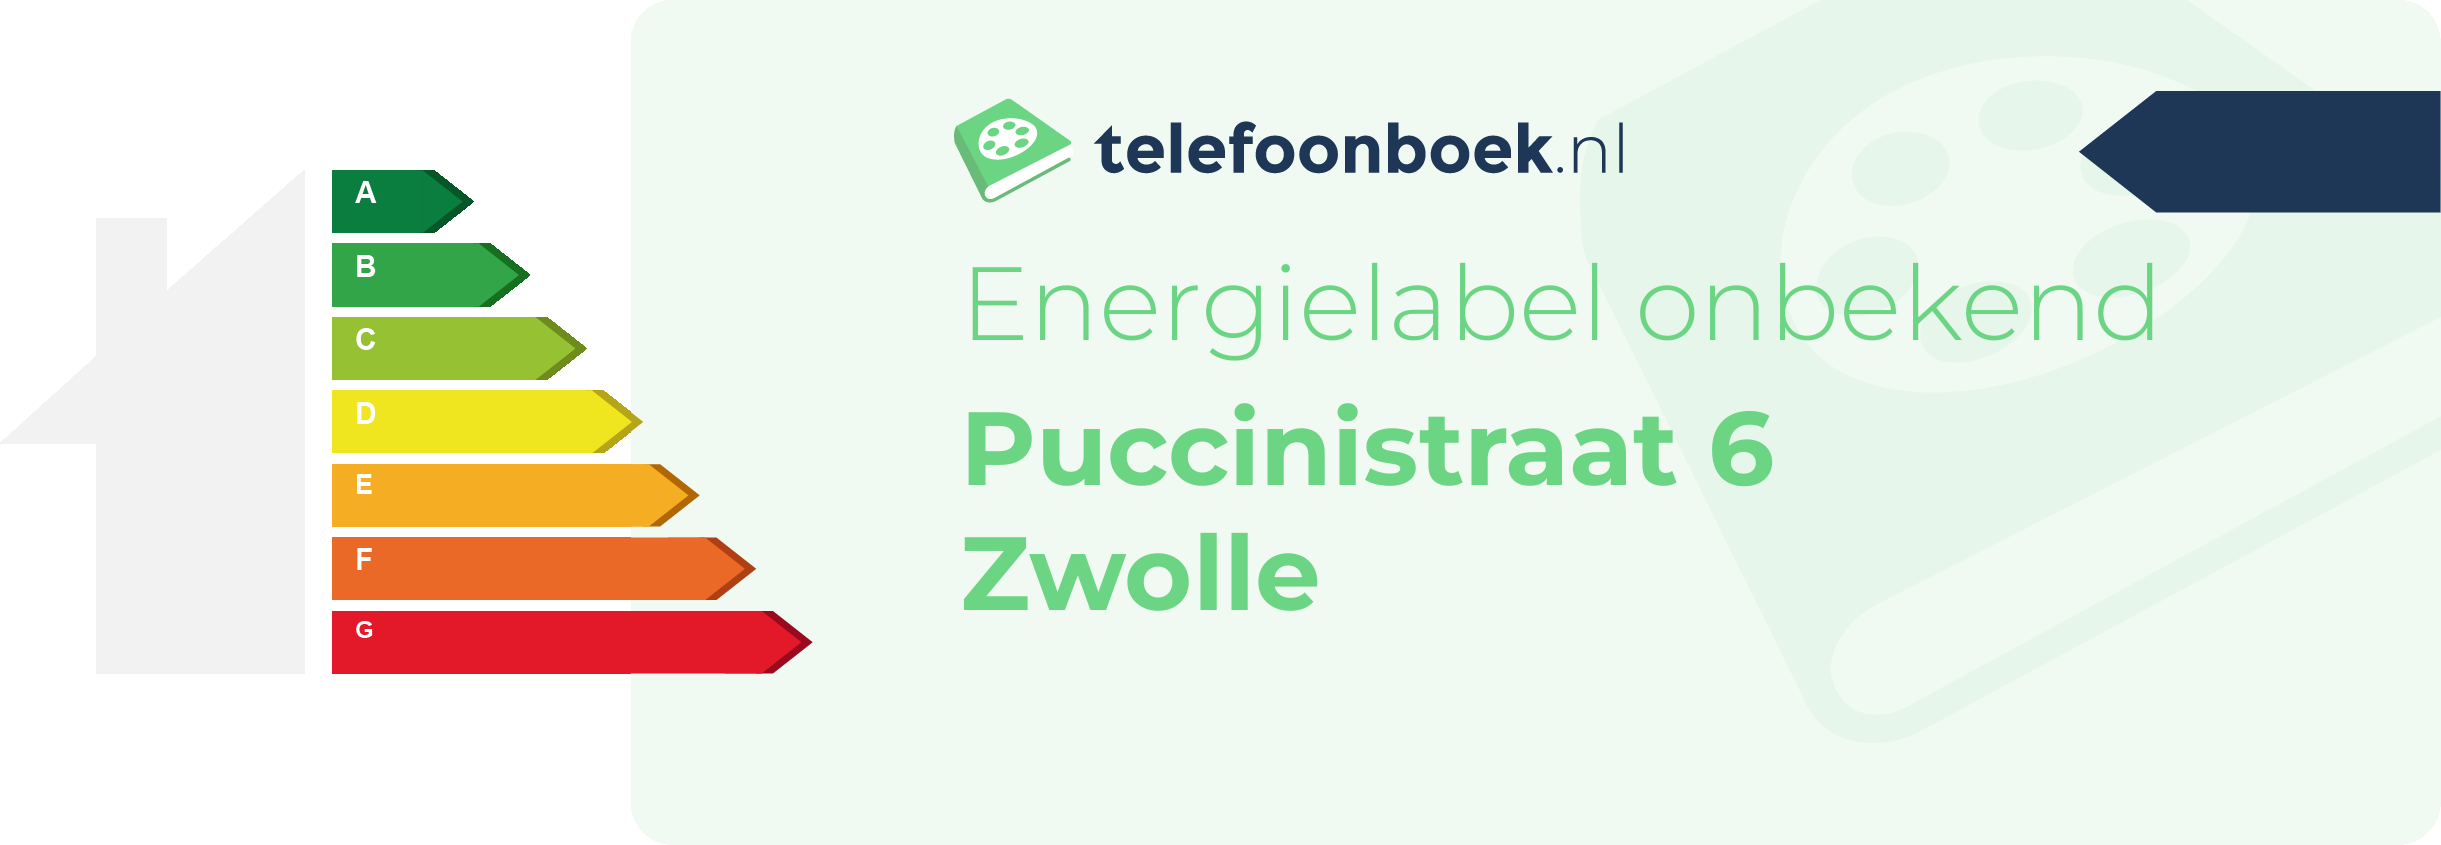 Energielabel Puccinistraat 6 Zwolle